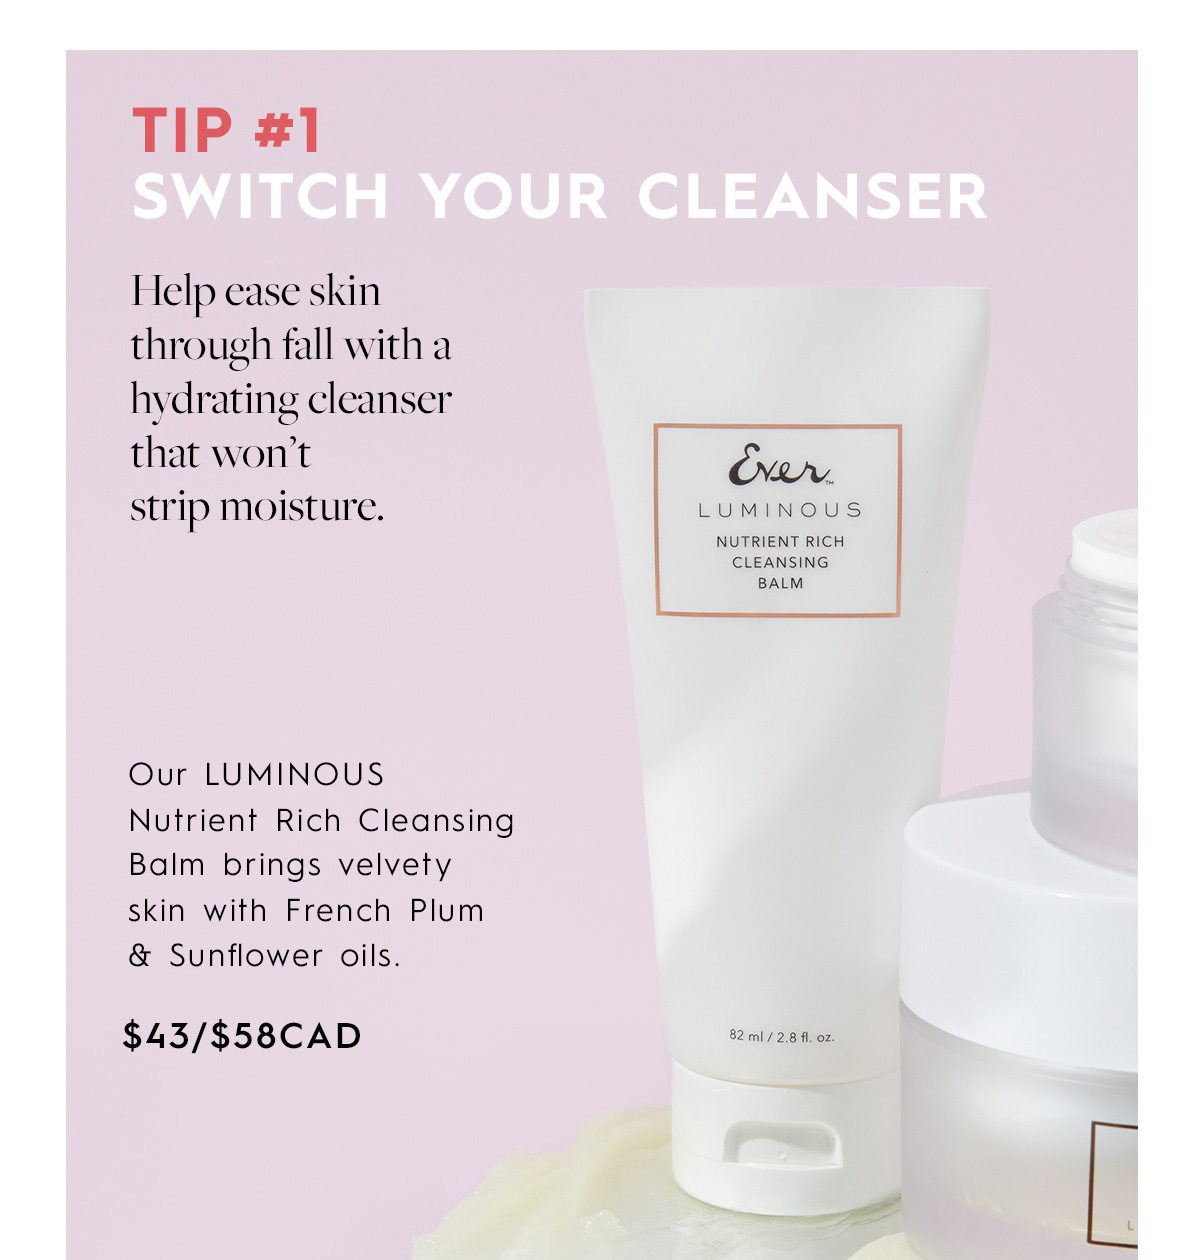 TIP #1 SWITCH YOUR CLEANSER